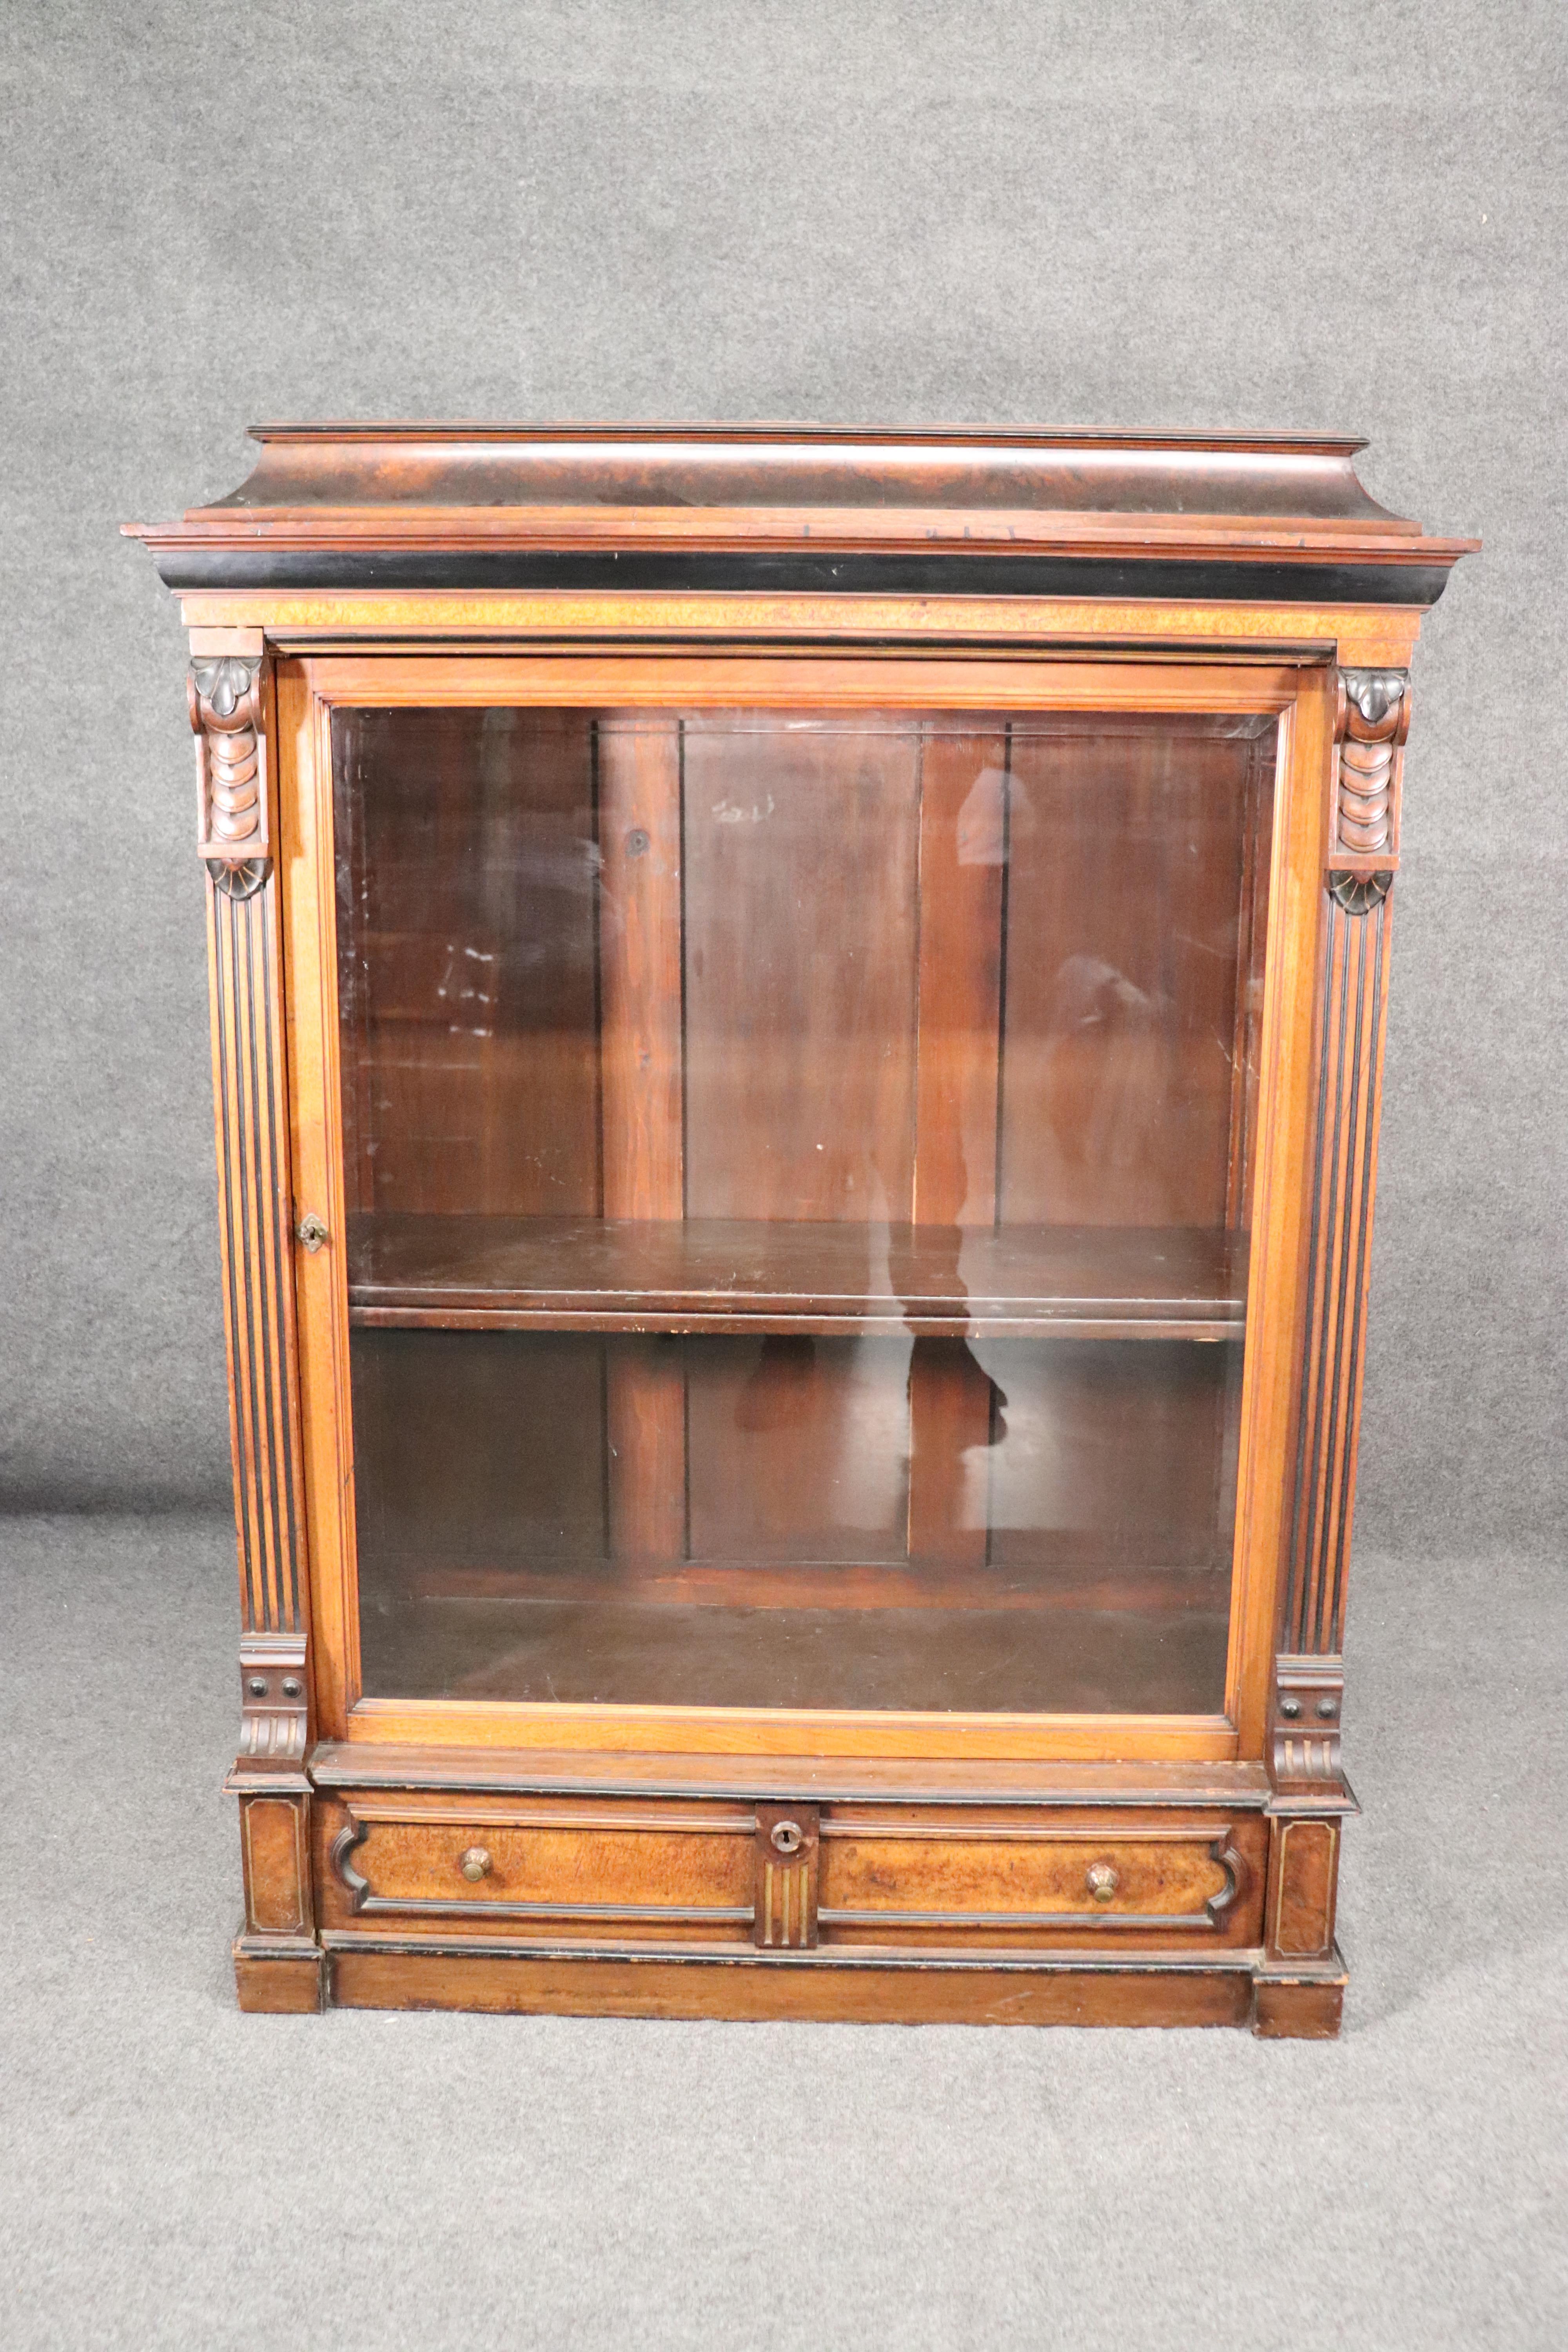 This is a gorgeous bookcase or vitrine measuring 66 inches tall x 51 wide x 19 inches deep. The condition of the piece is very good considering its approximately 150 years old. The cabinet is burled walnut and done in the Renaissance Revival style